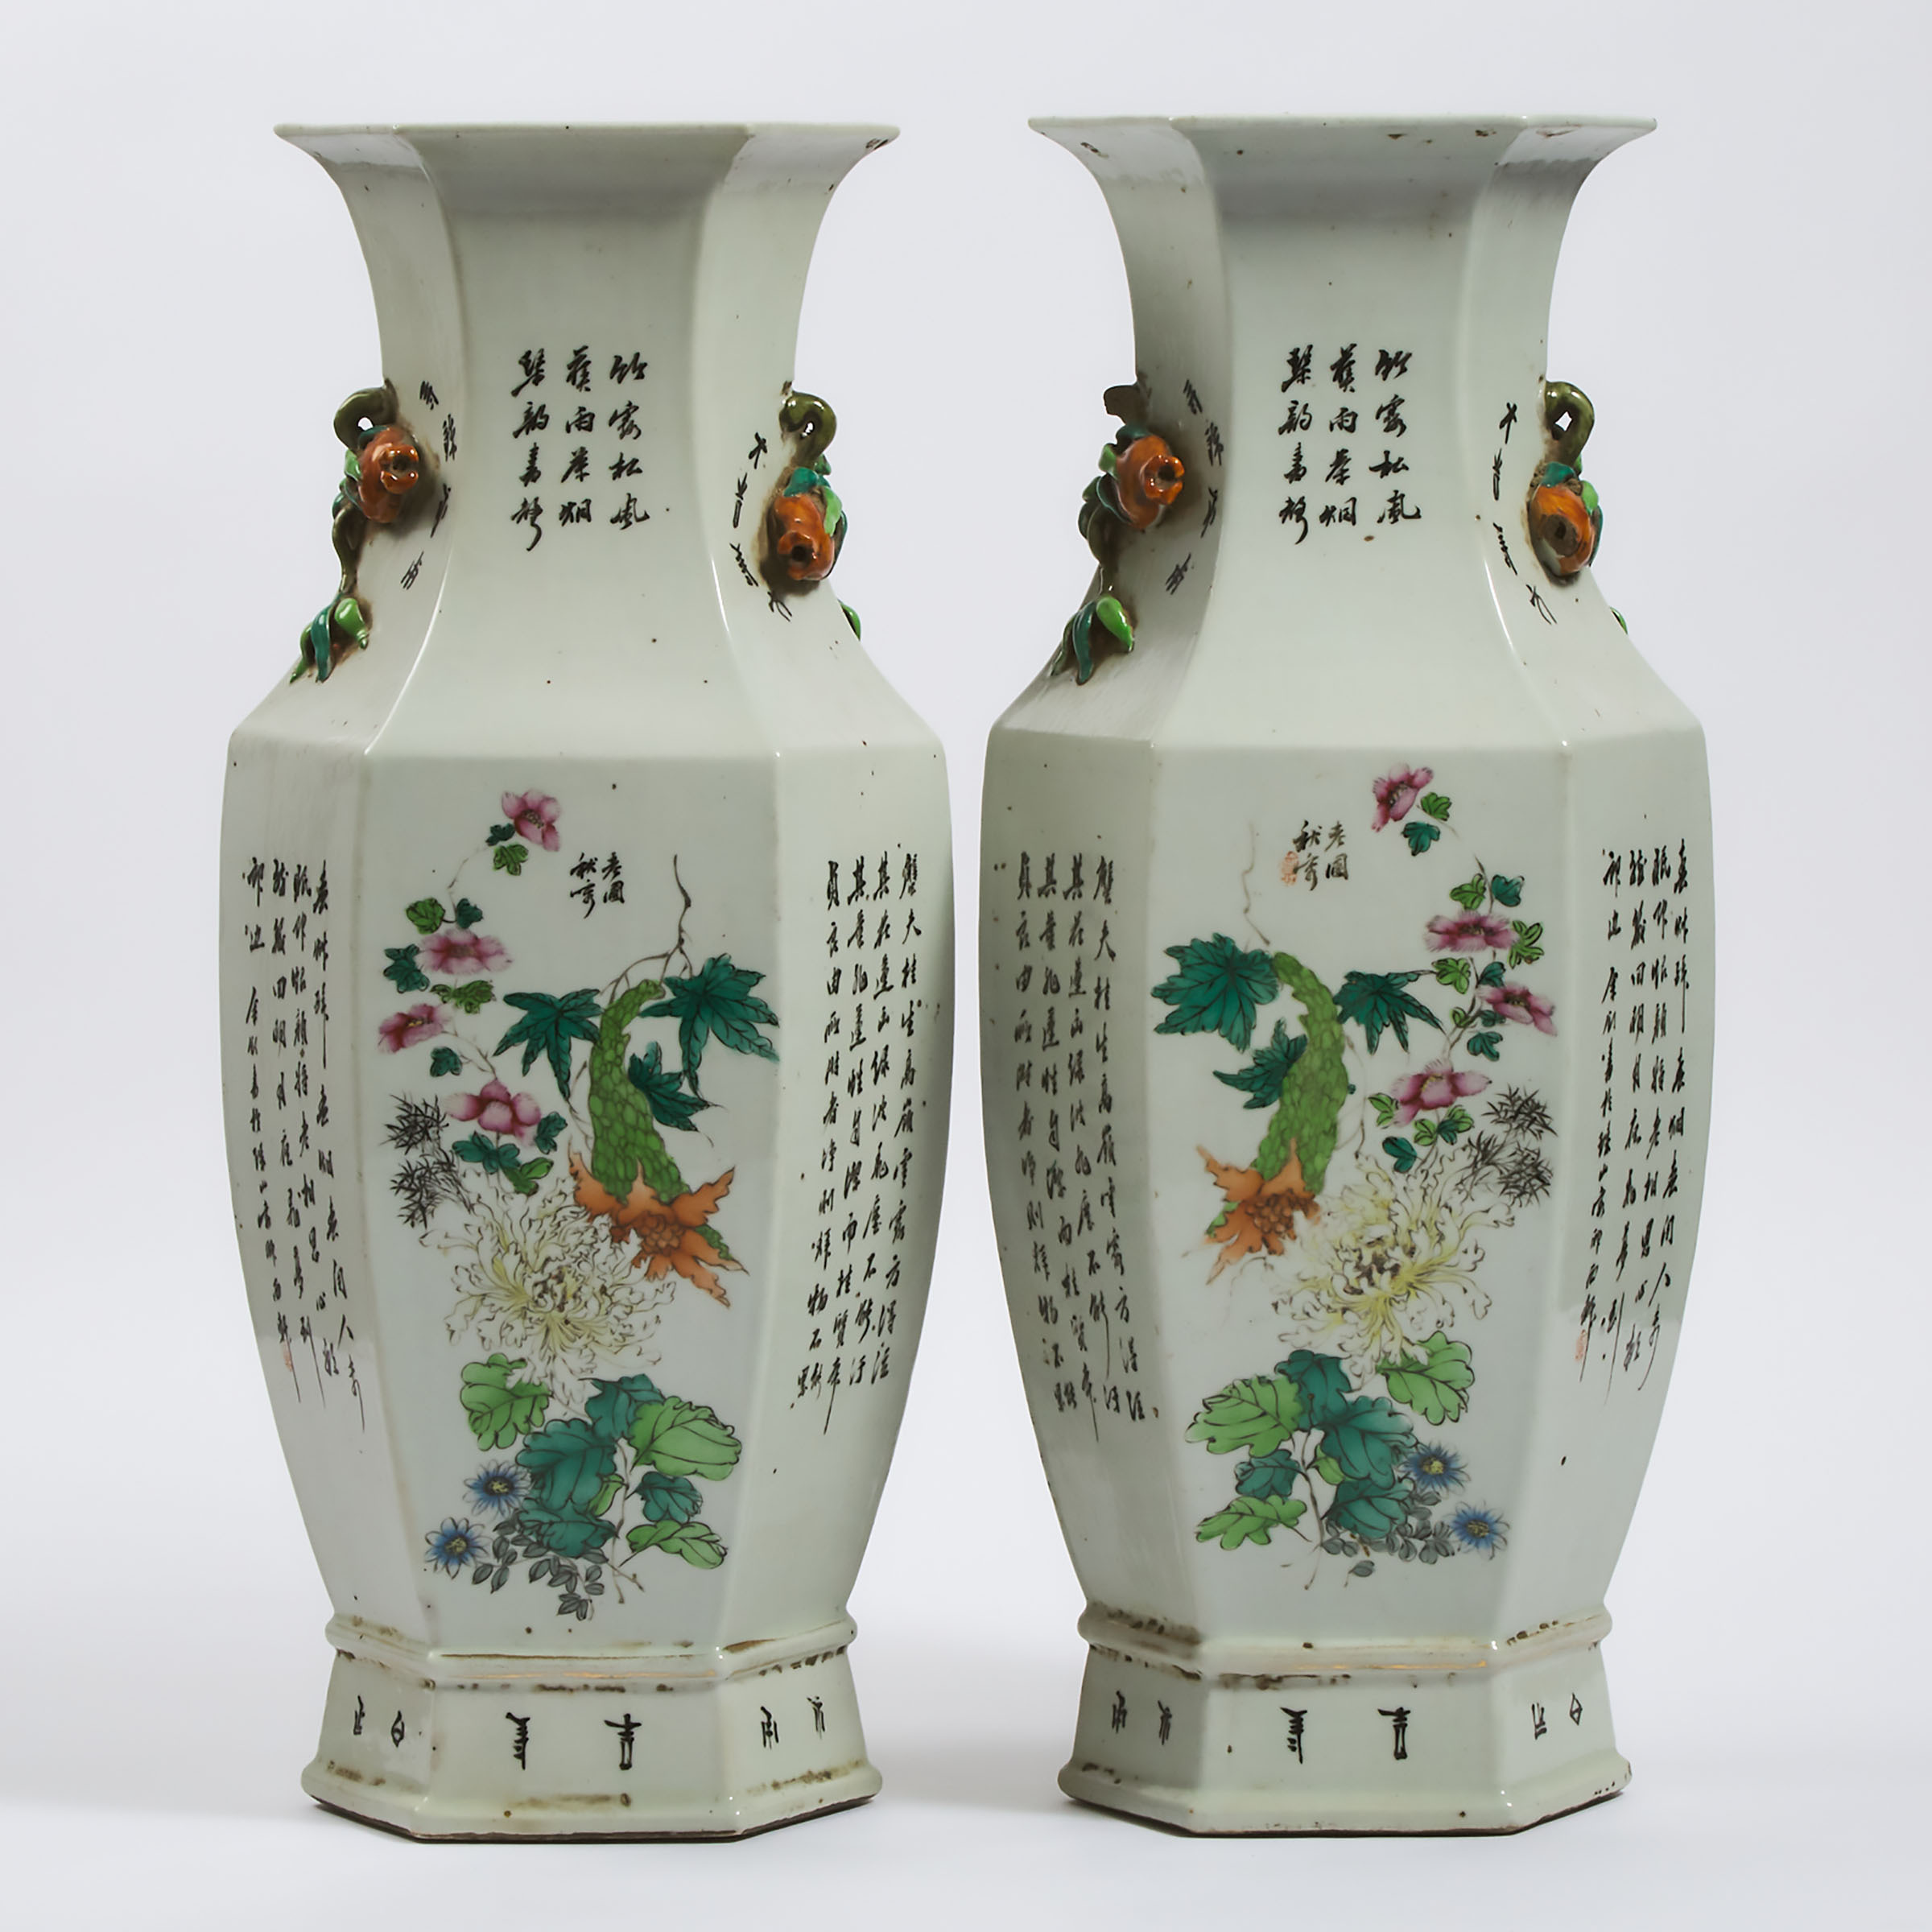 A Pair of Large Famille Rose Hexagonal Vases, Republican Period